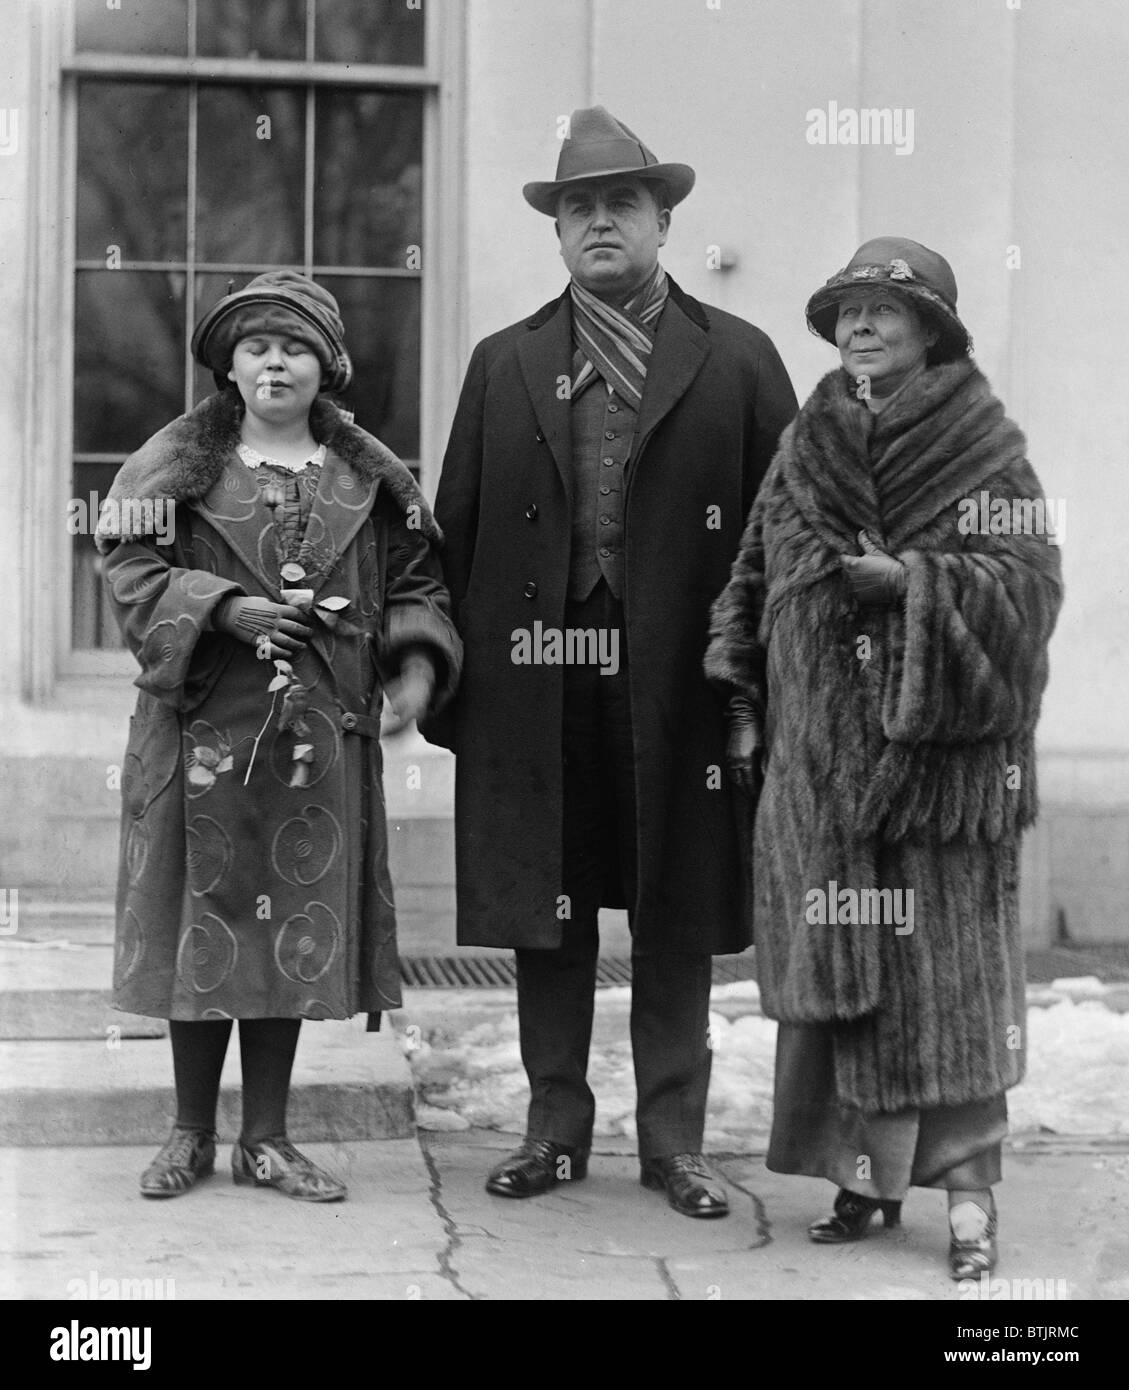 Labor Union leader, John L. Lewis (1880-1969), with his wife and daughter, in Washington, D.C. in 1922. Stock Photo